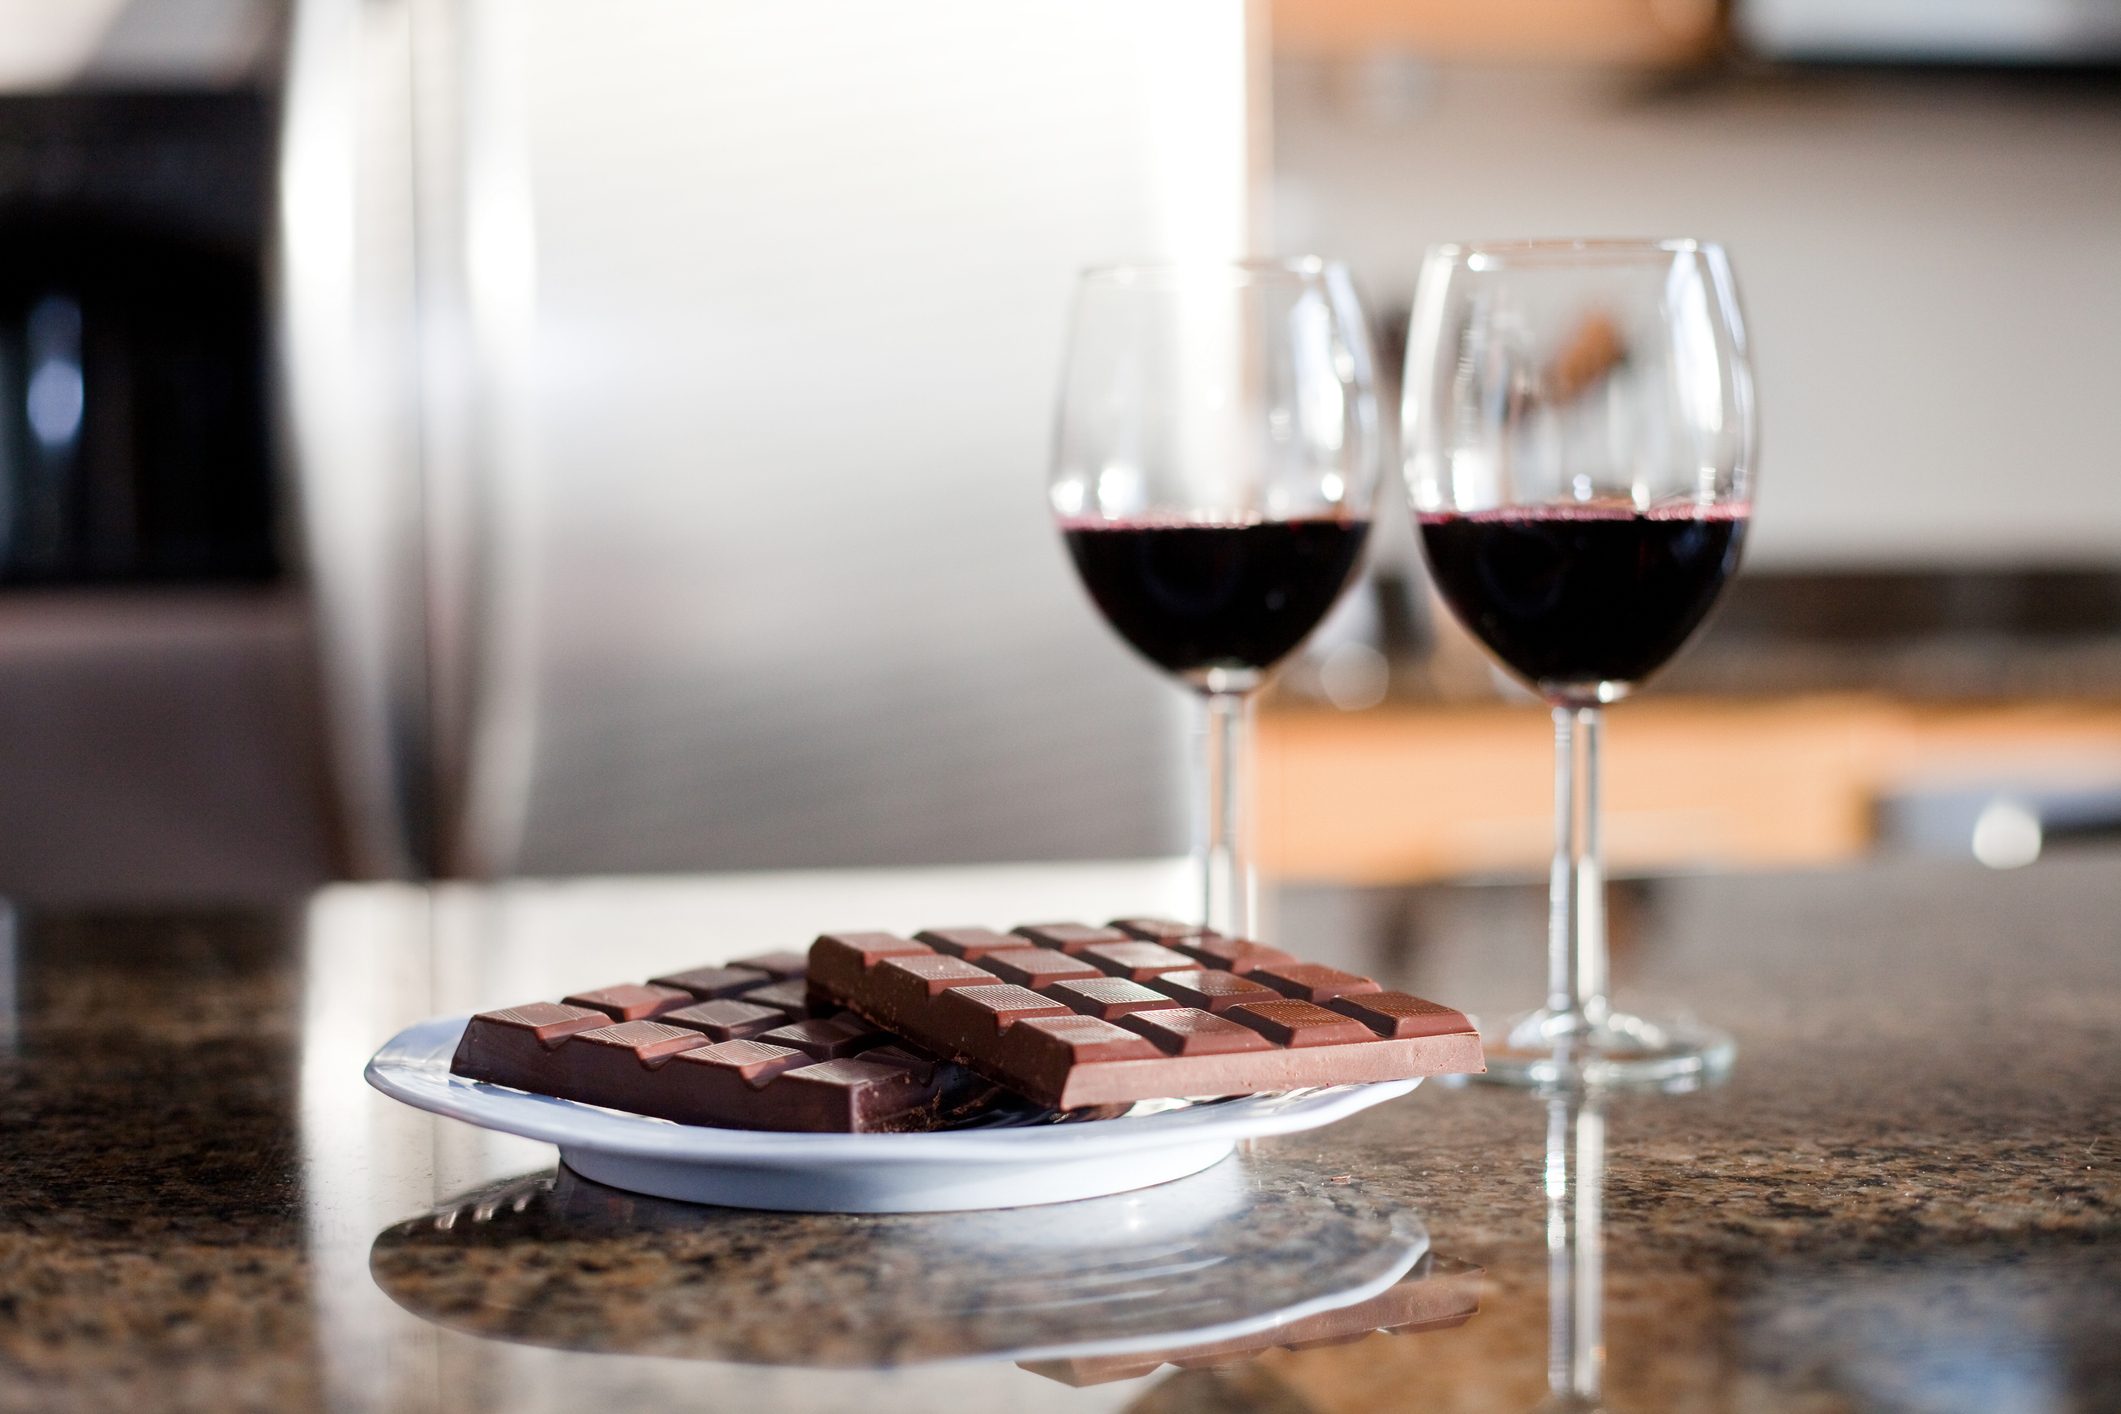 chocolate on a plate on kitchen counter with two glasses of red wine in the background